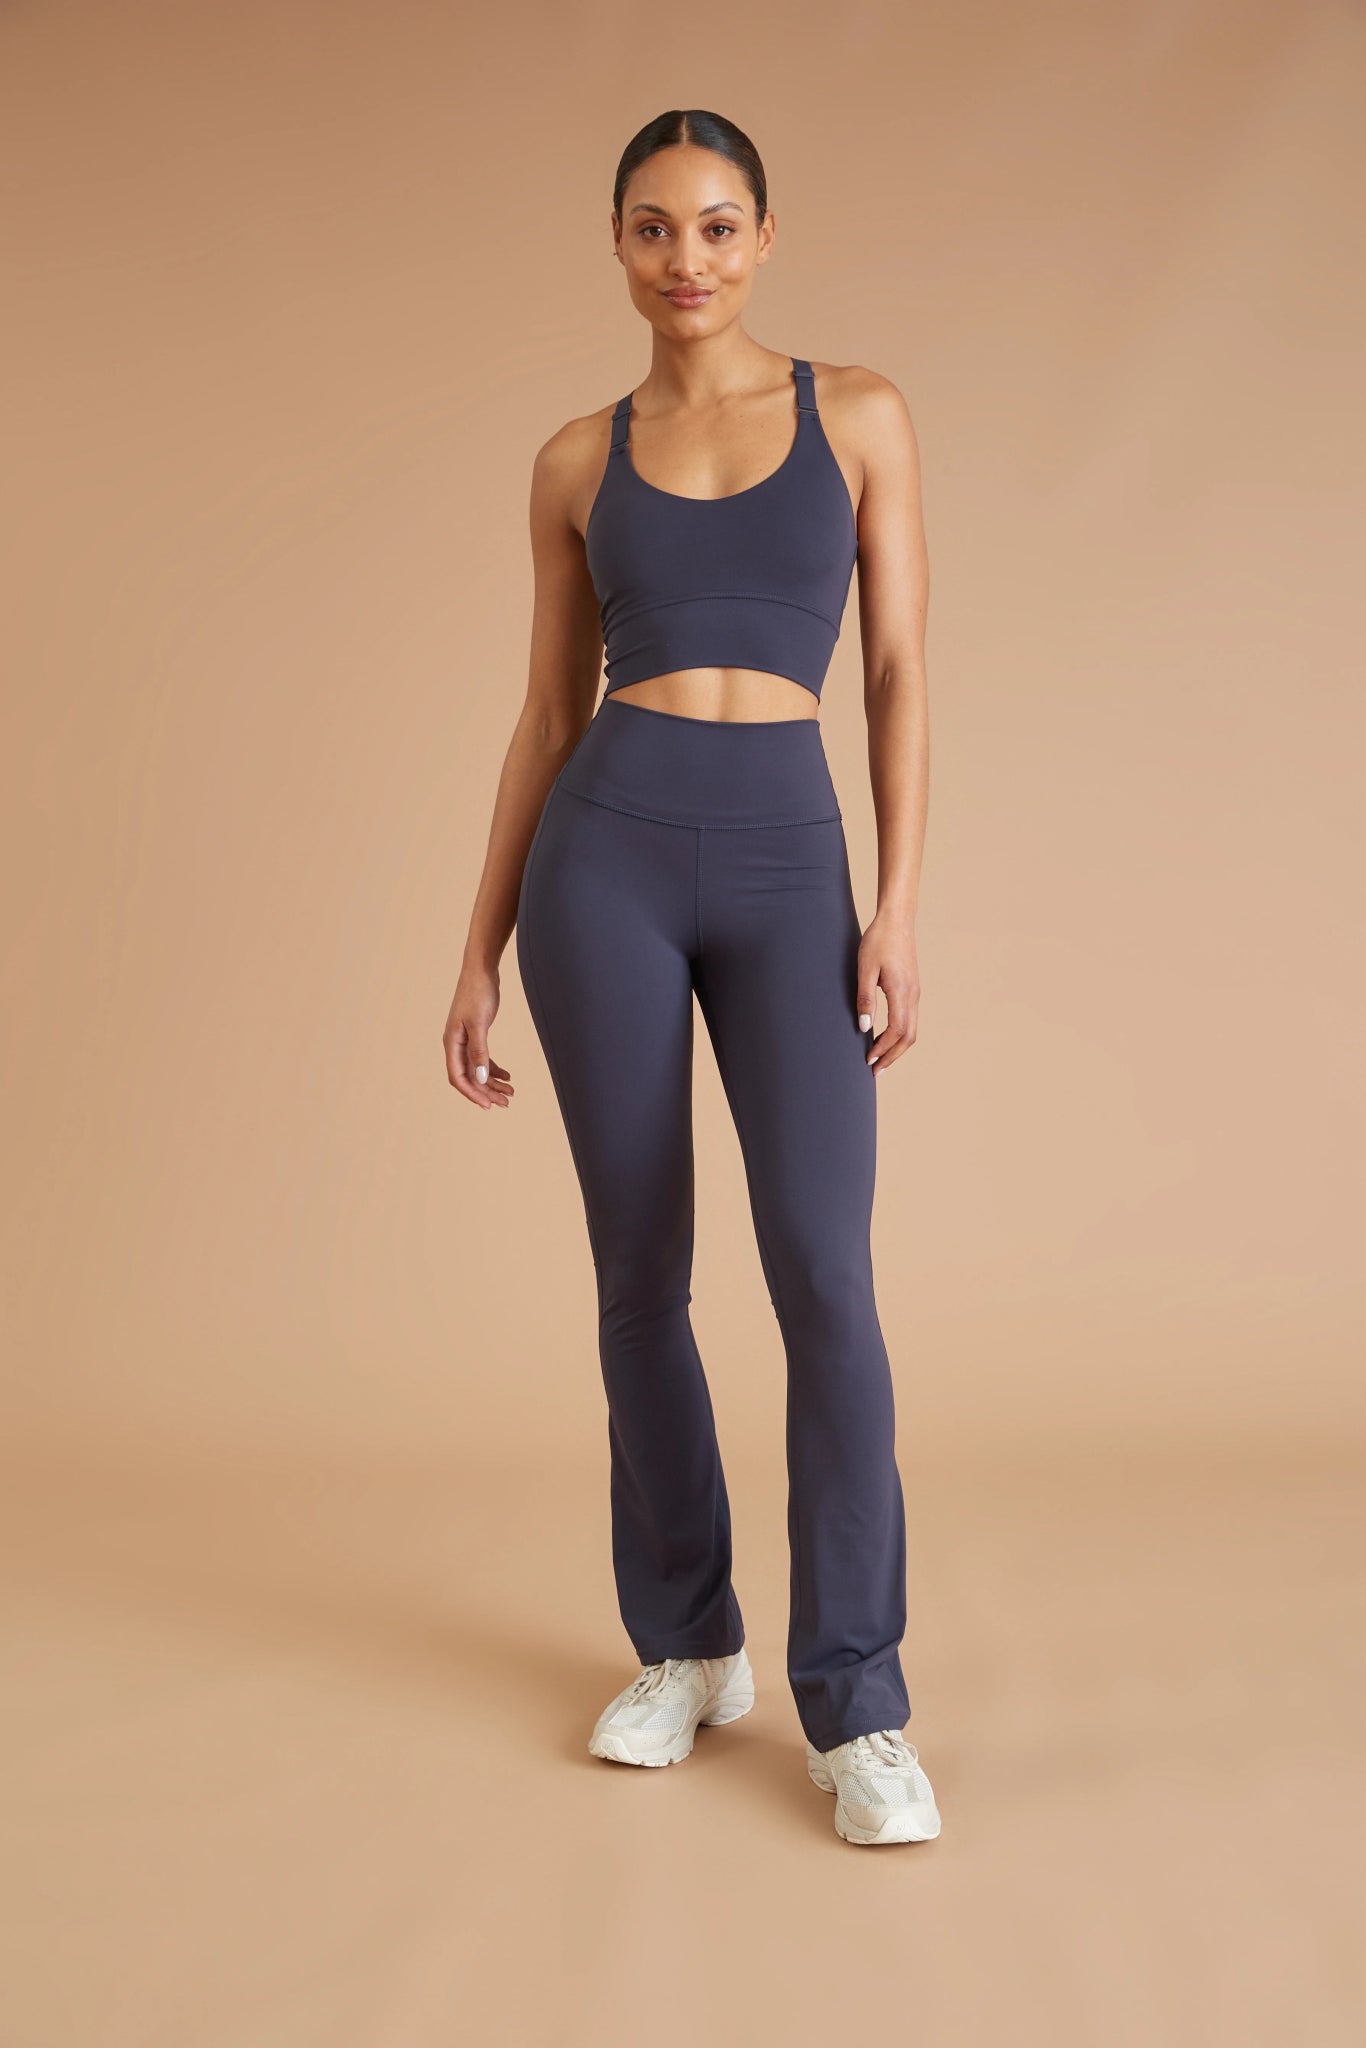 Women's Yoga Wear Collection